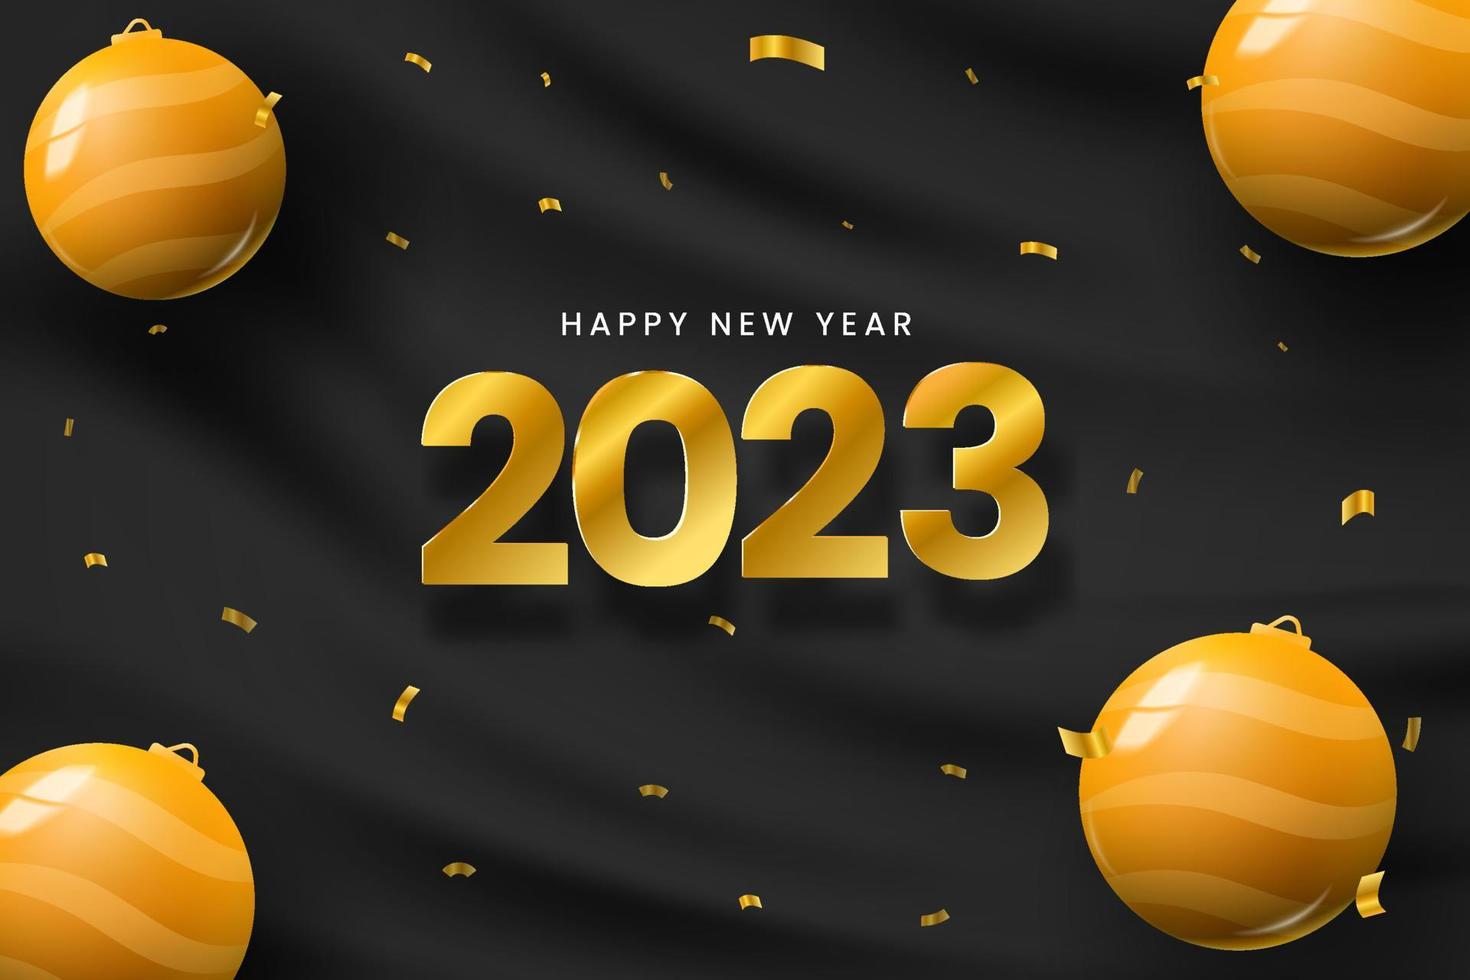 2023 merry Christmas Happy new year background banner black color. Greeting Card, Poster. Vector Illustration.